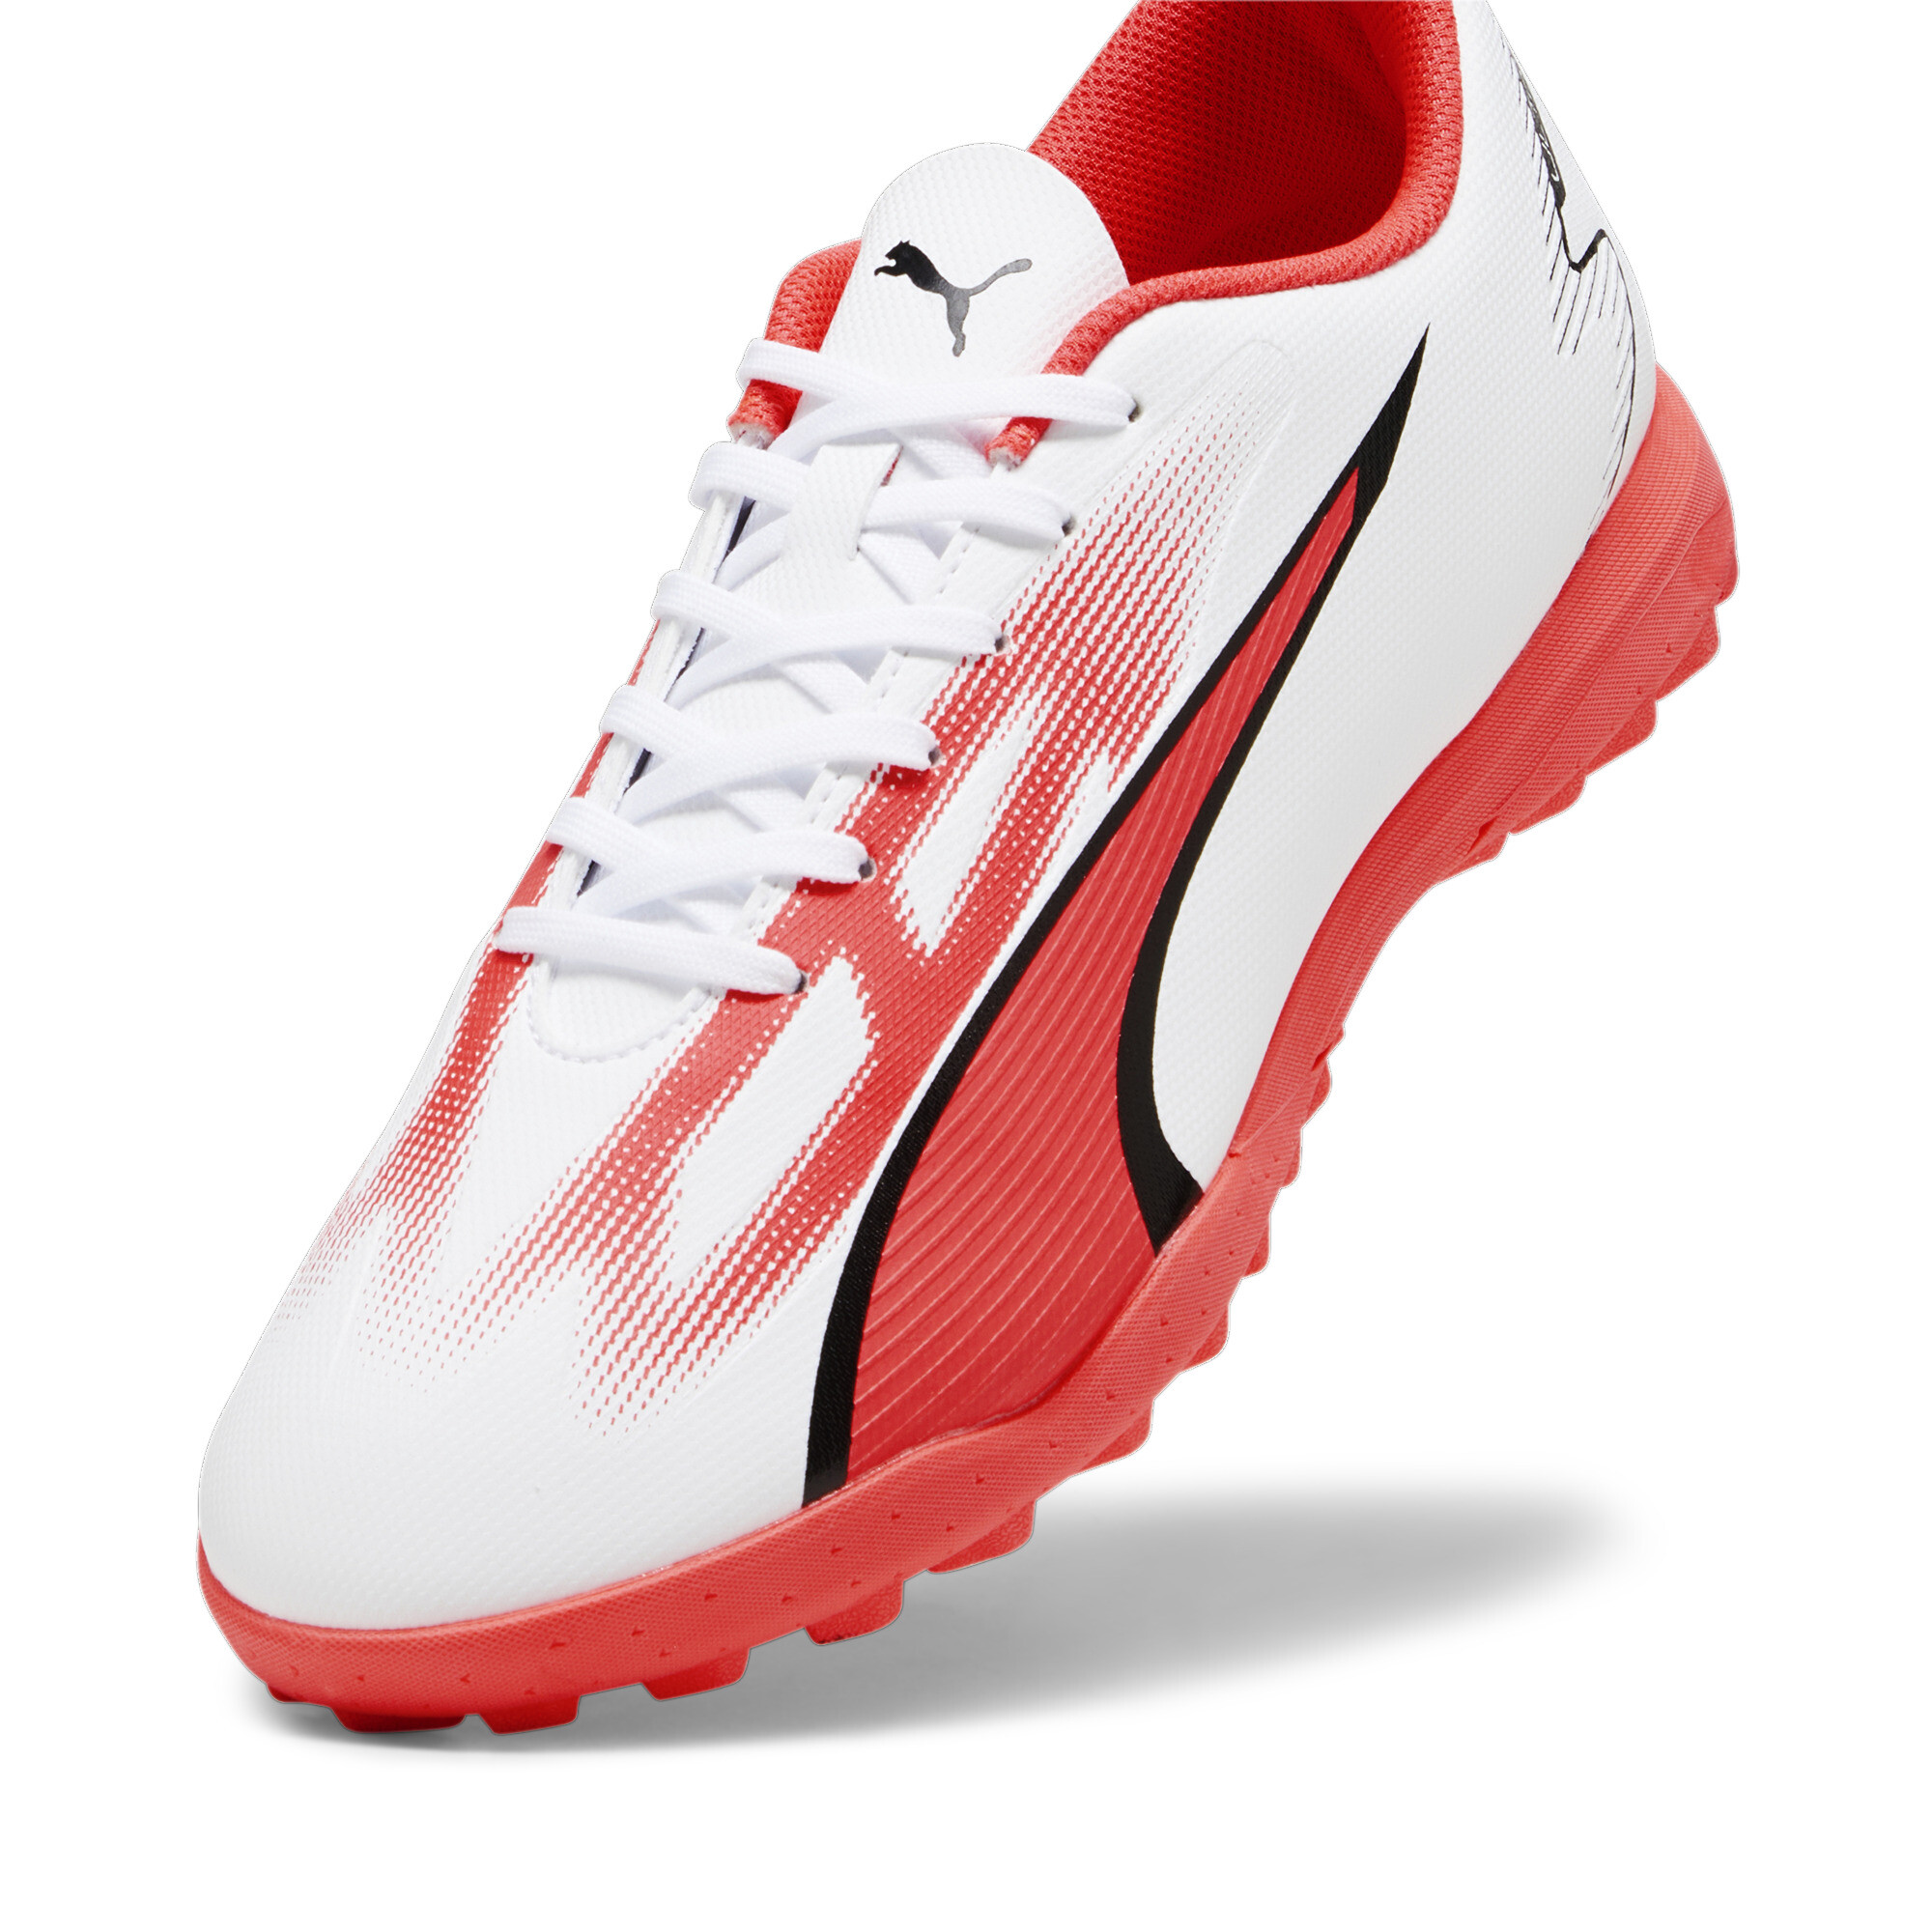 Men's Puma ULTRA PLAY TT's Football Boots, White, Size 40, Shoes